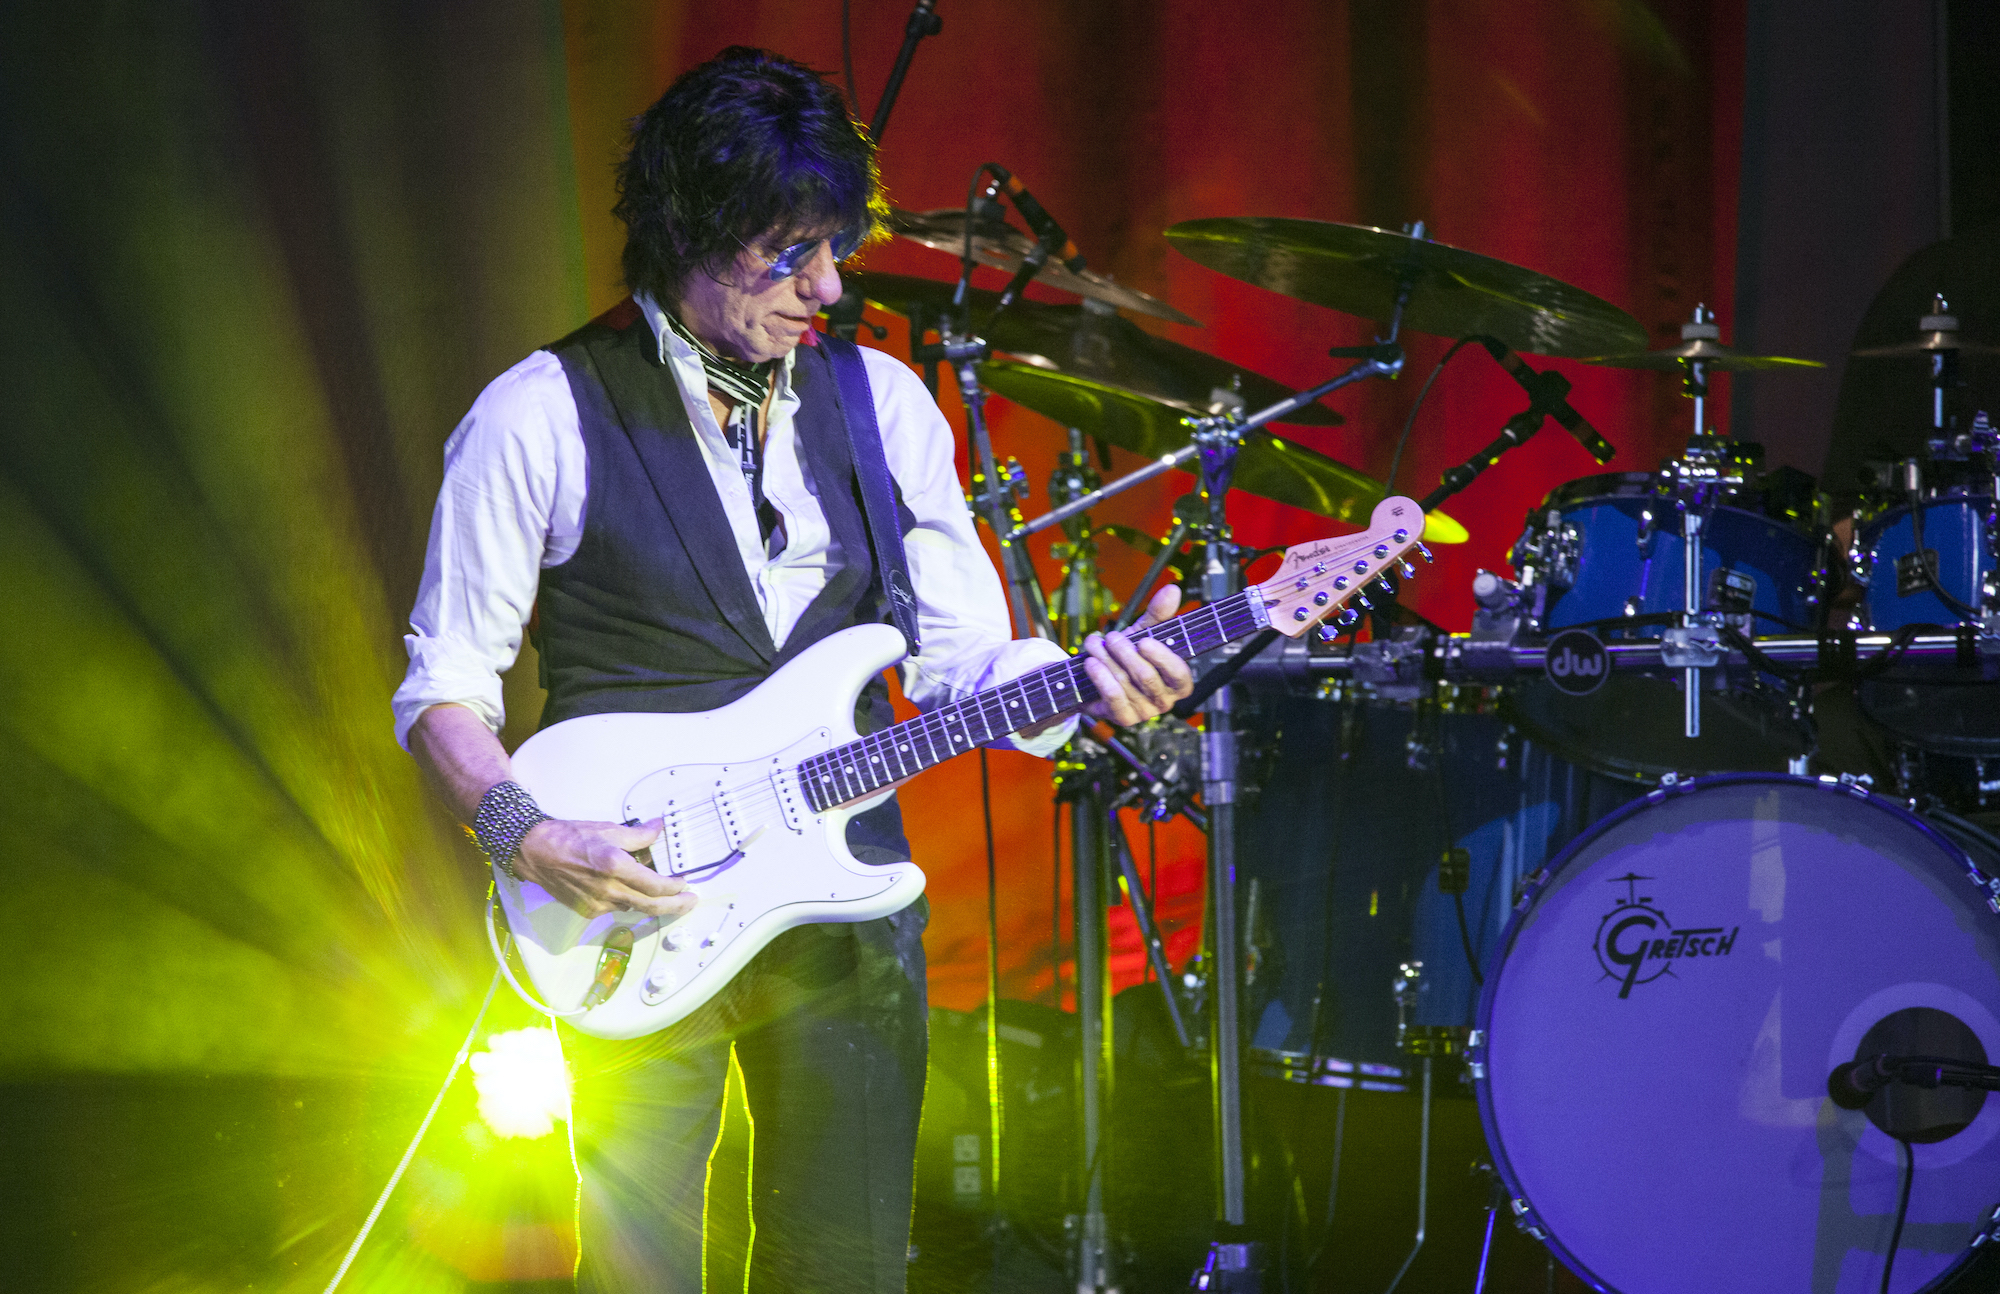 Jeff Beck on stage performing